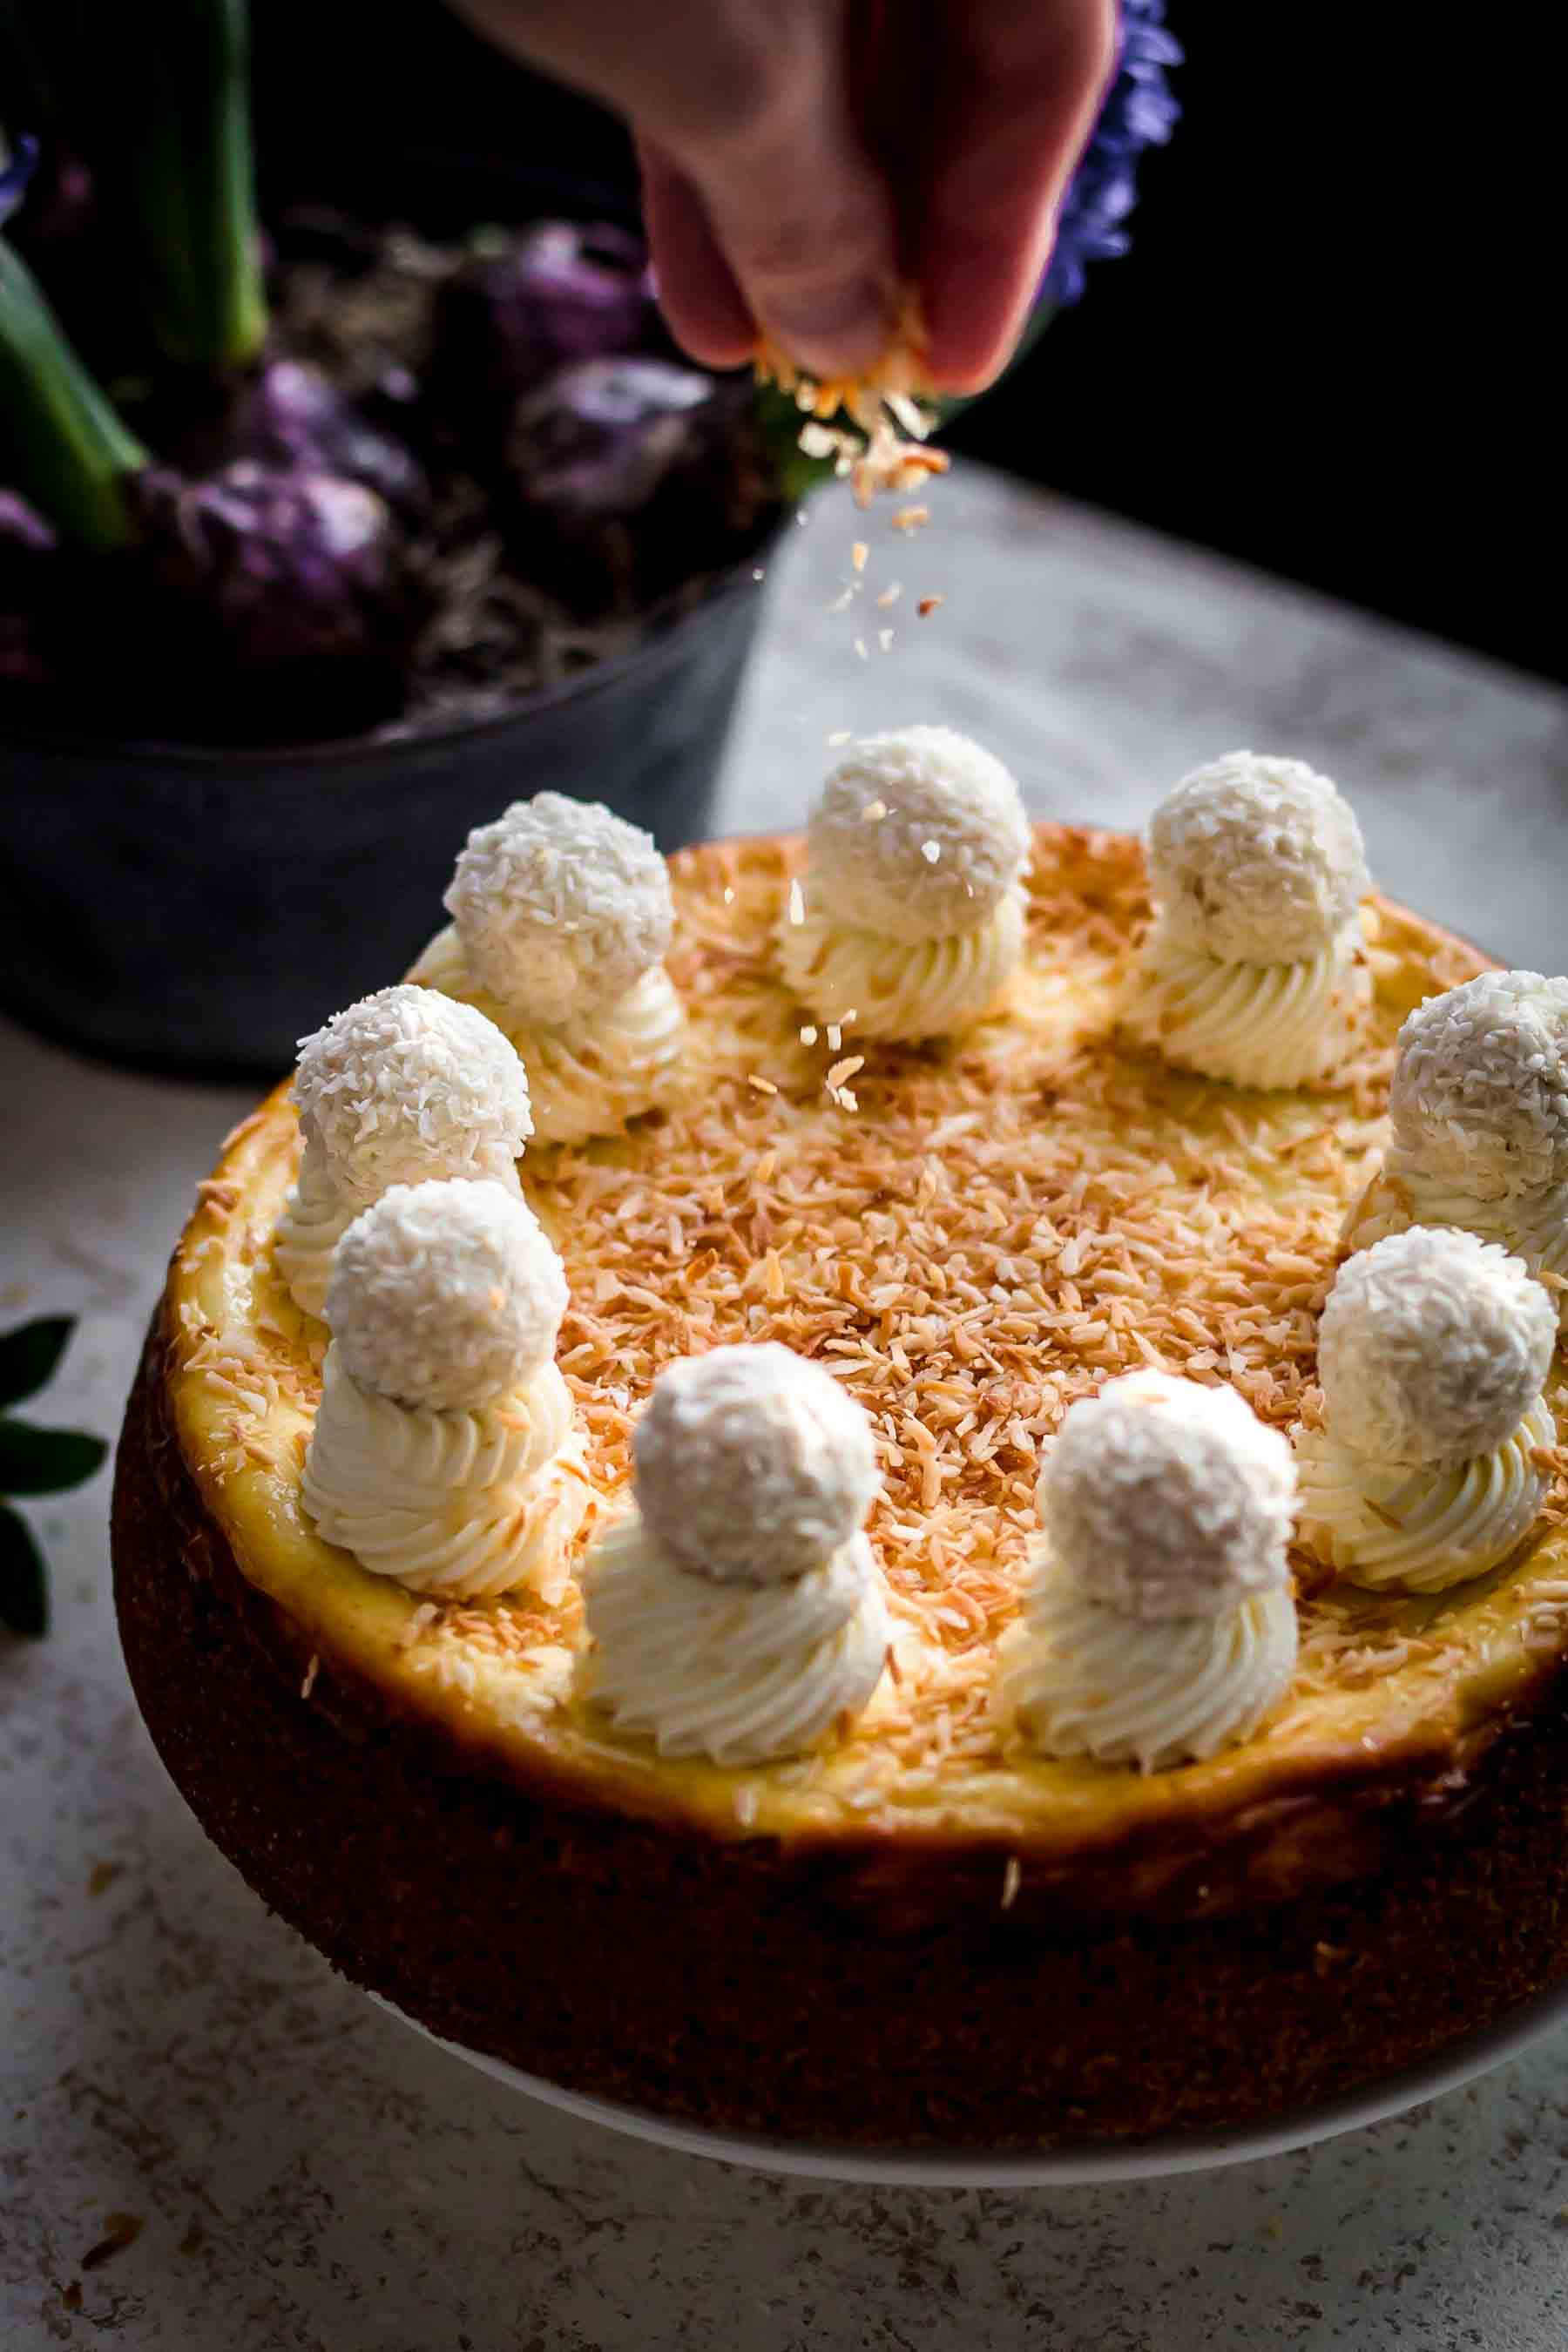 Baked and decorated Coconut Cheesecake on serving plate